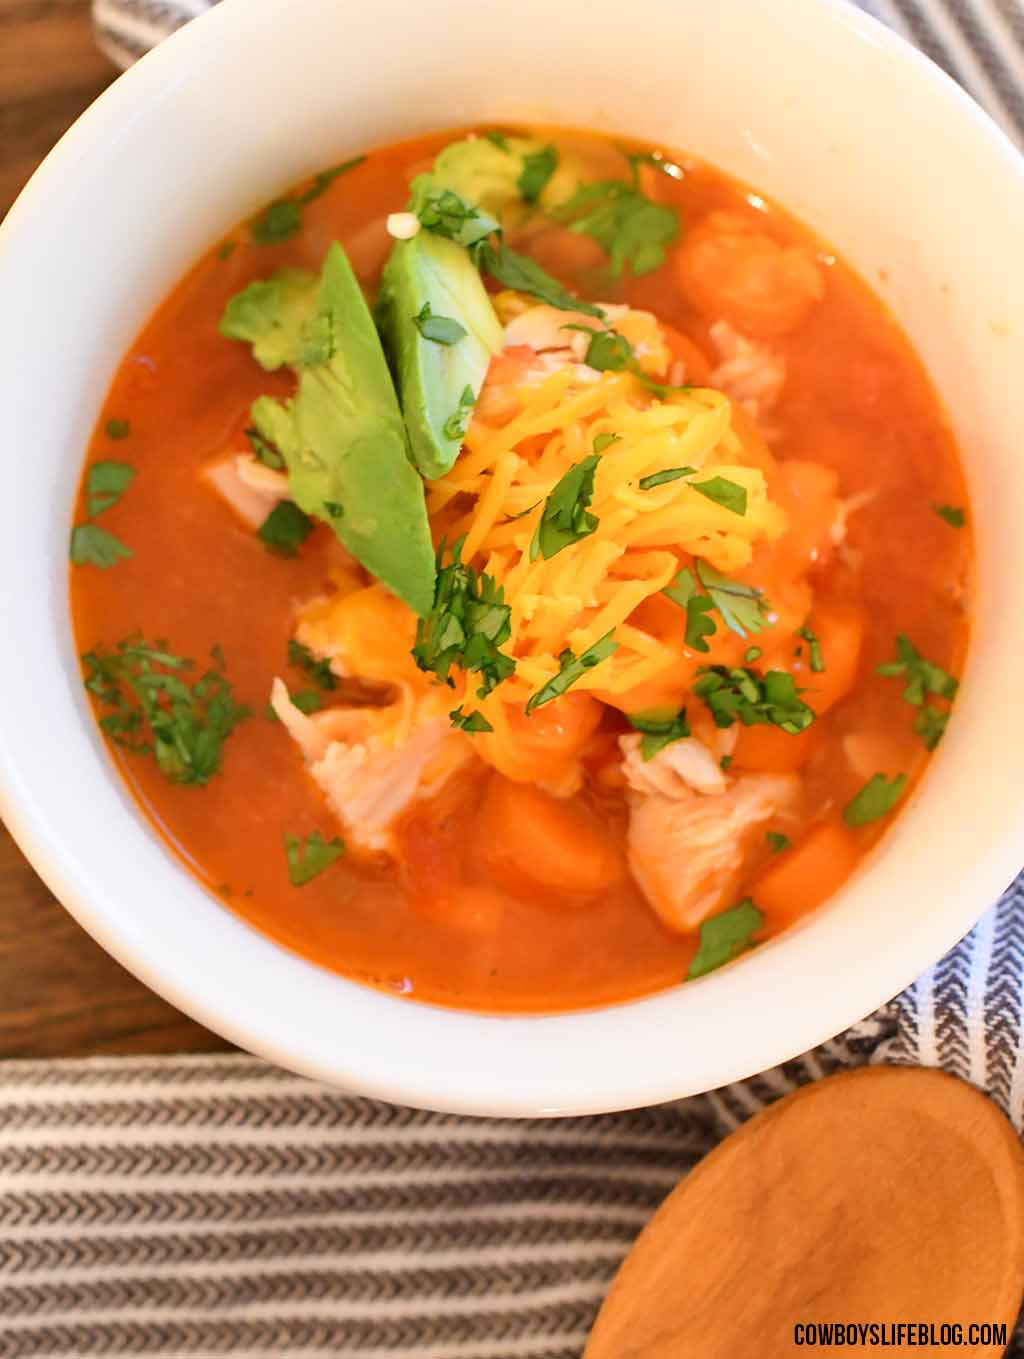 How to make Chicken Tortilla Soup